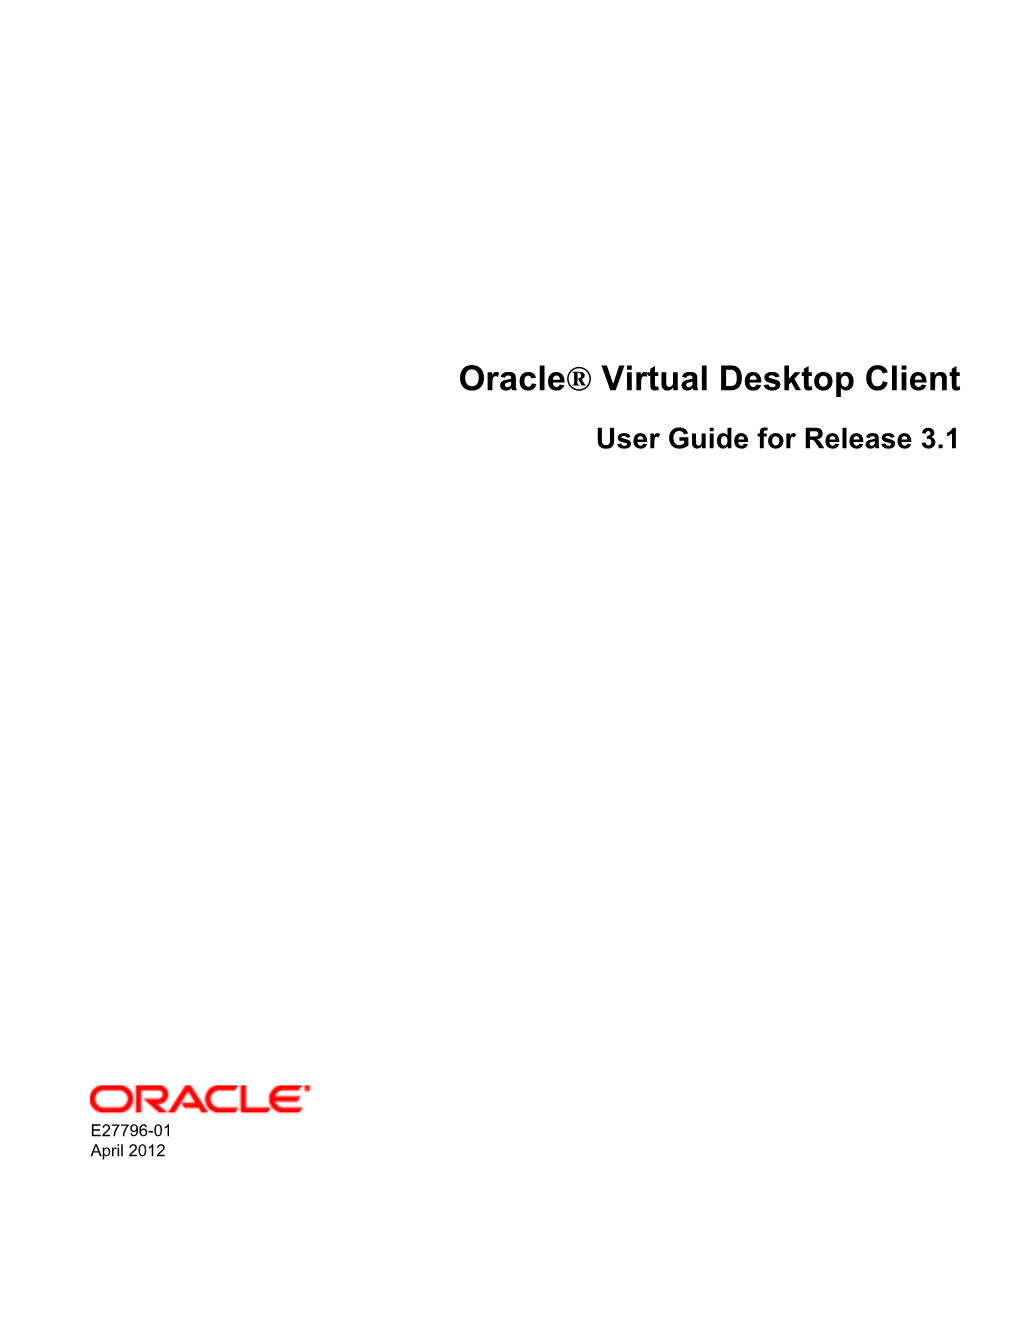 Oracle® Virtual Desktop Client User Guide for Release 3.1